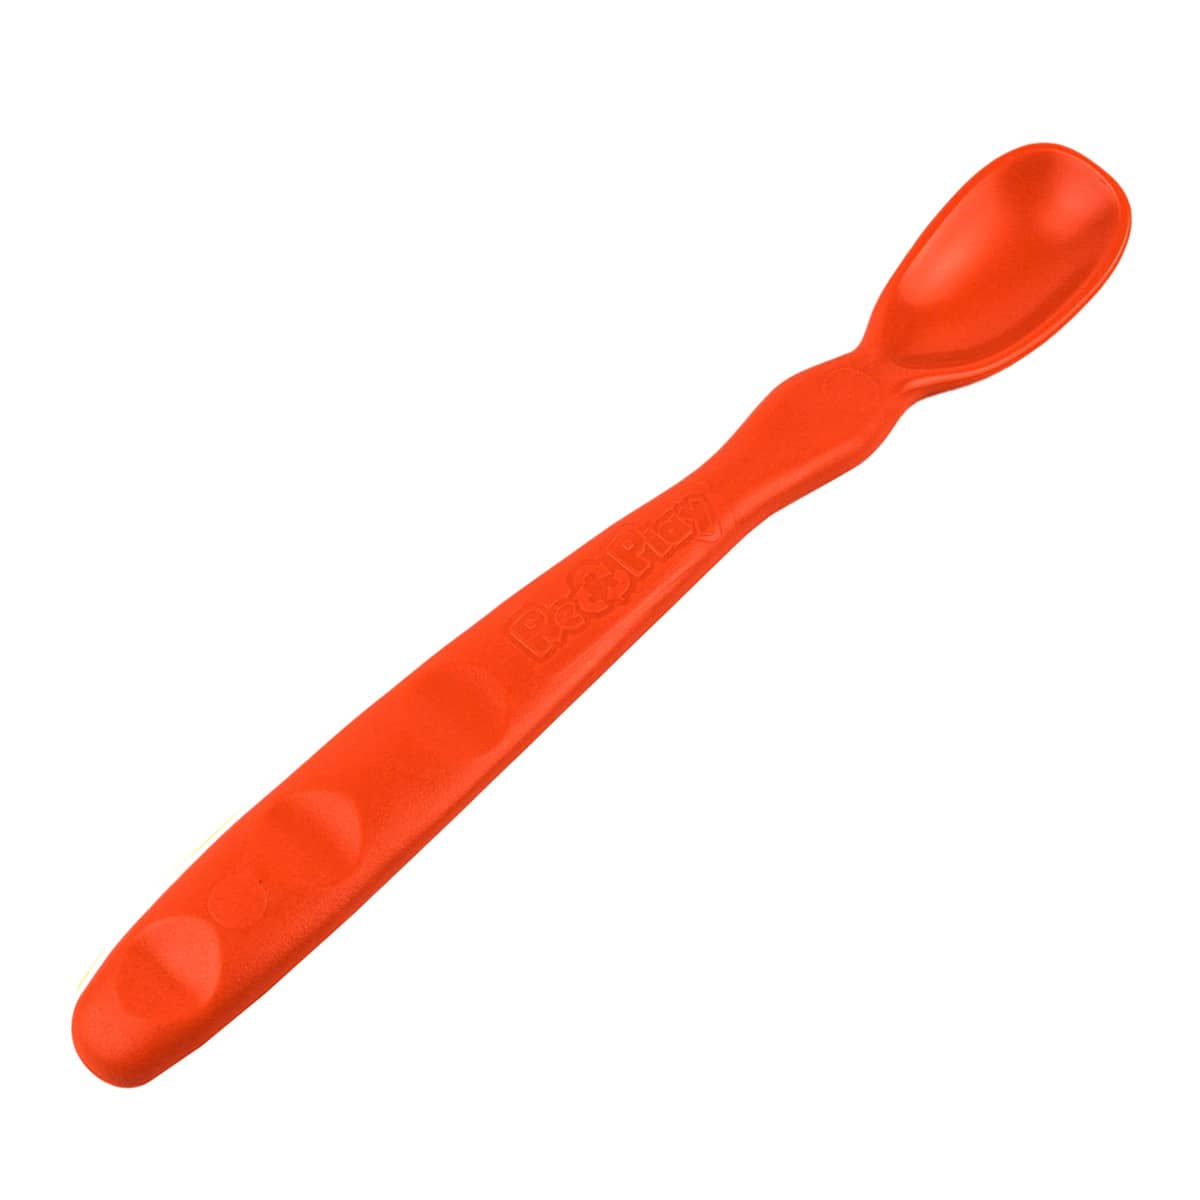 Re-Play Recycled Infant Spoon - Red